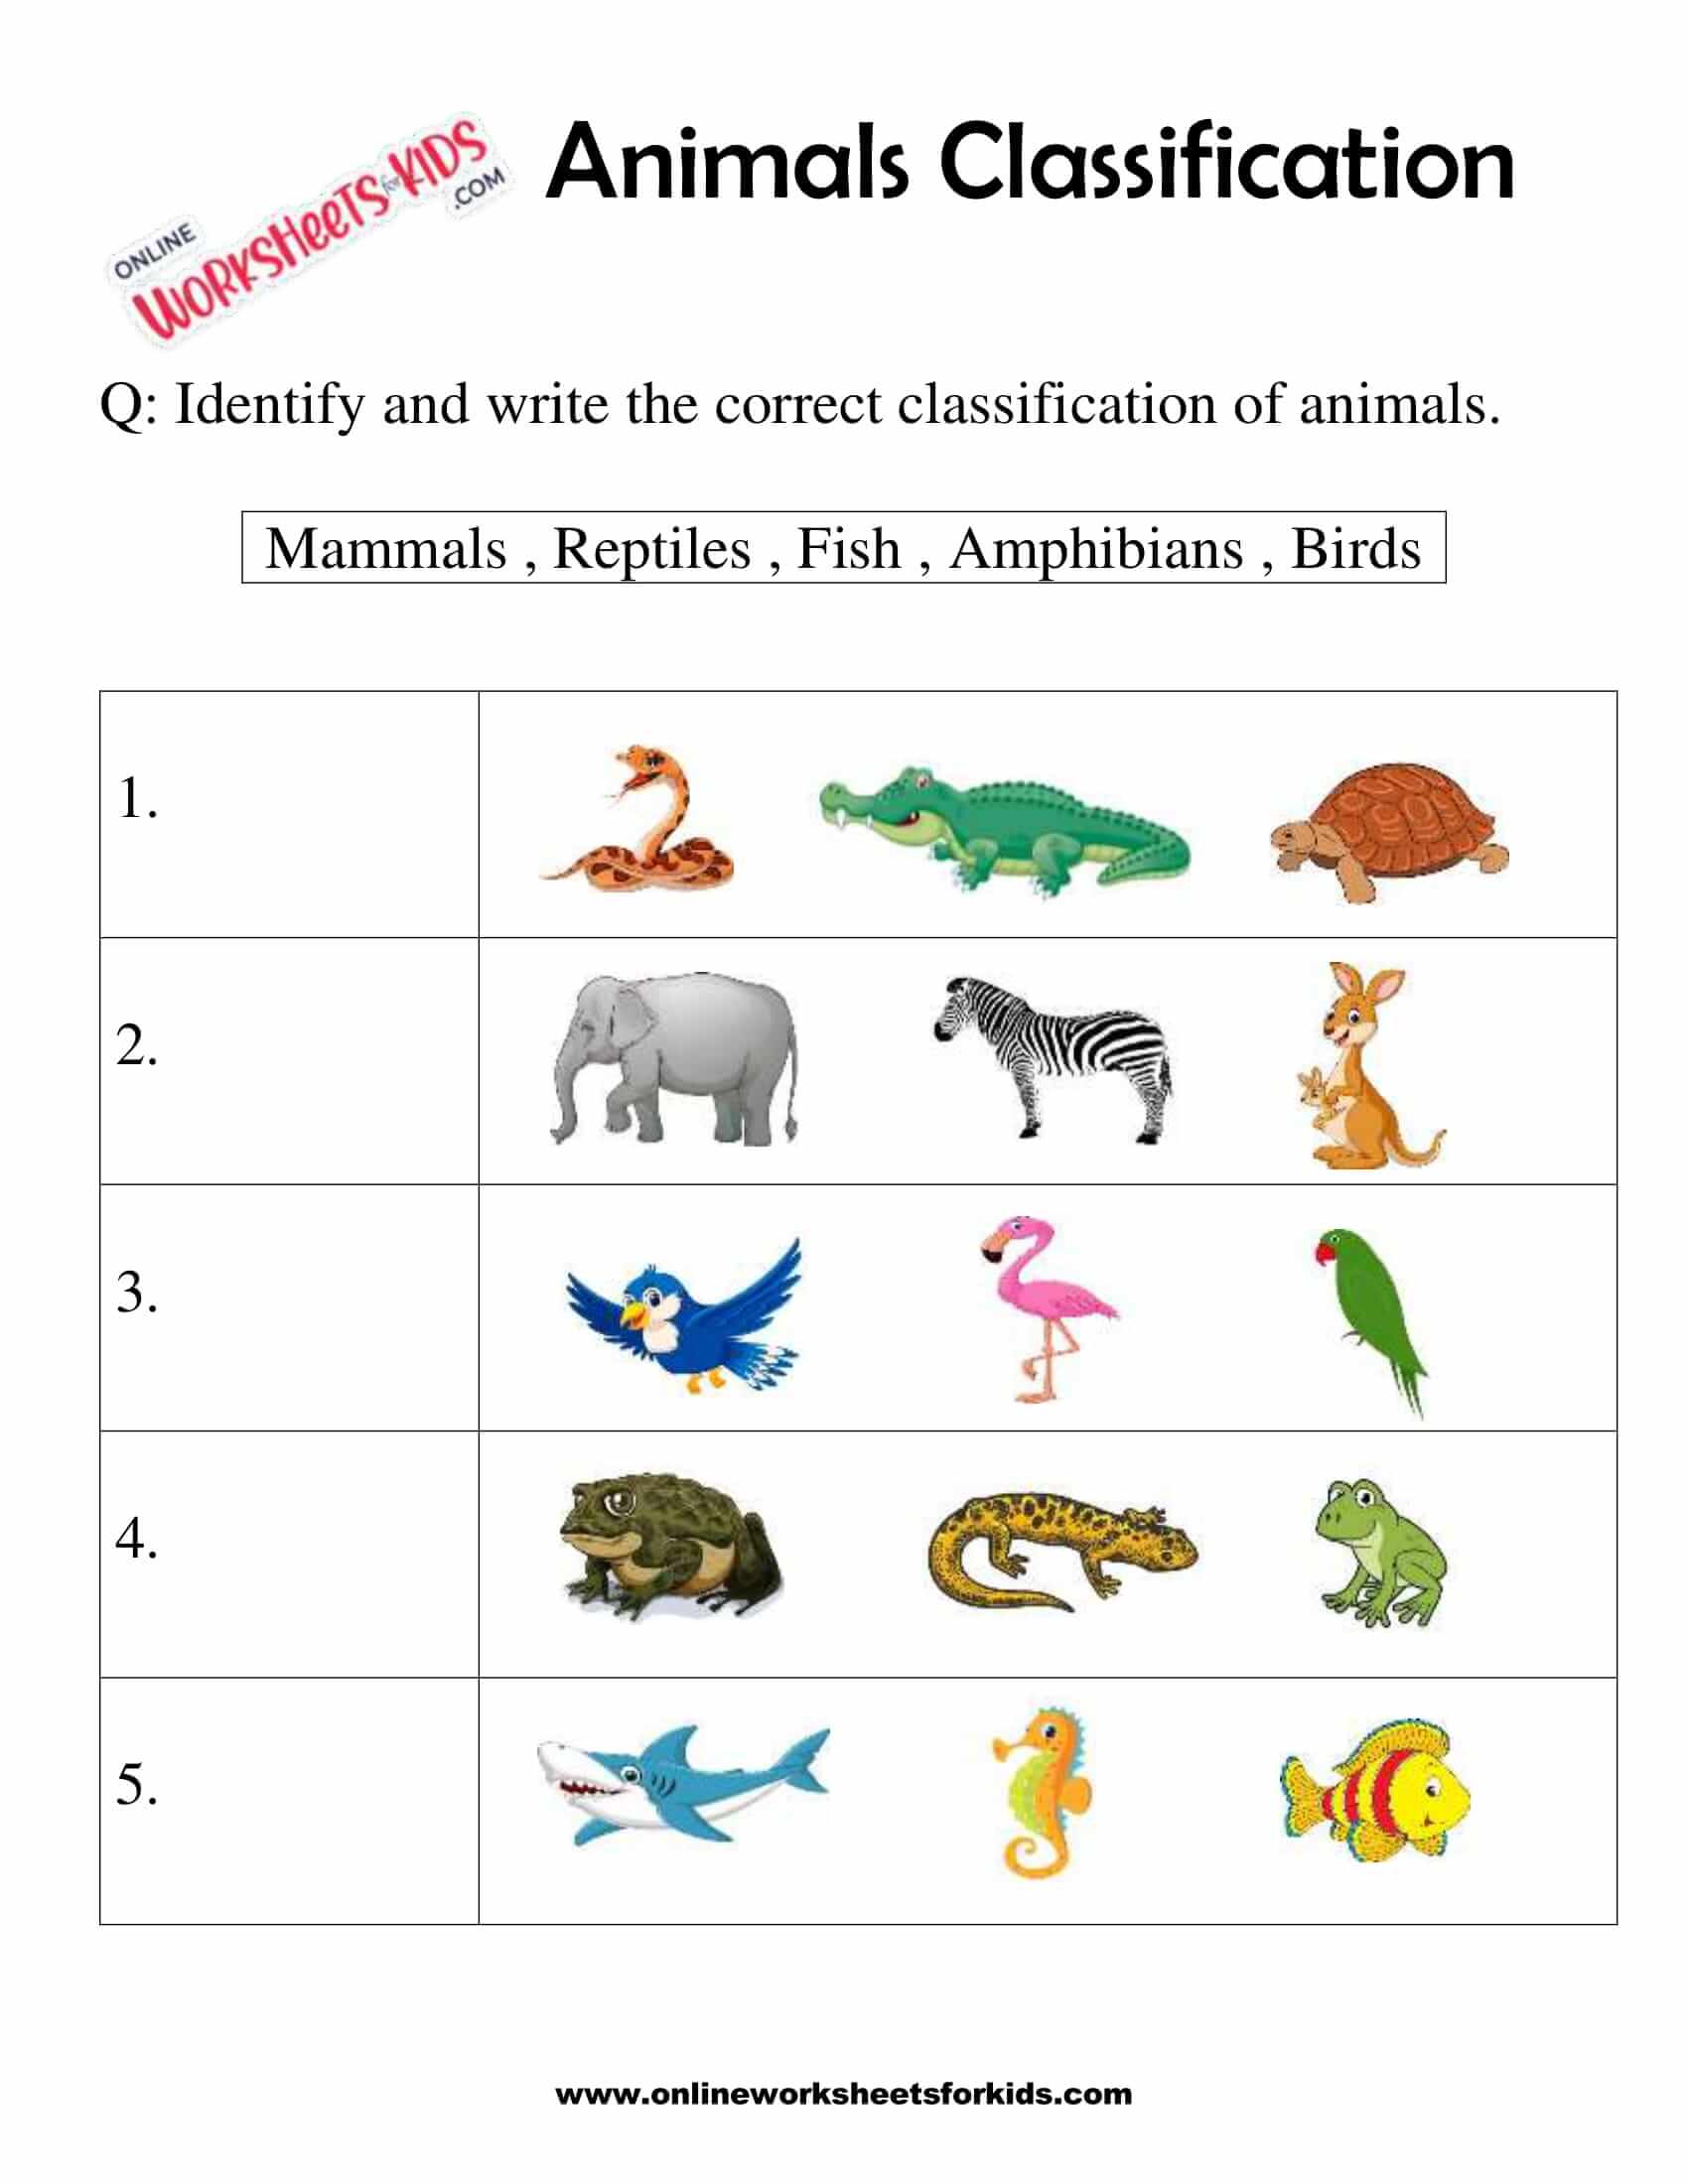 Animals Classification Worksheet For 1st Grade 2